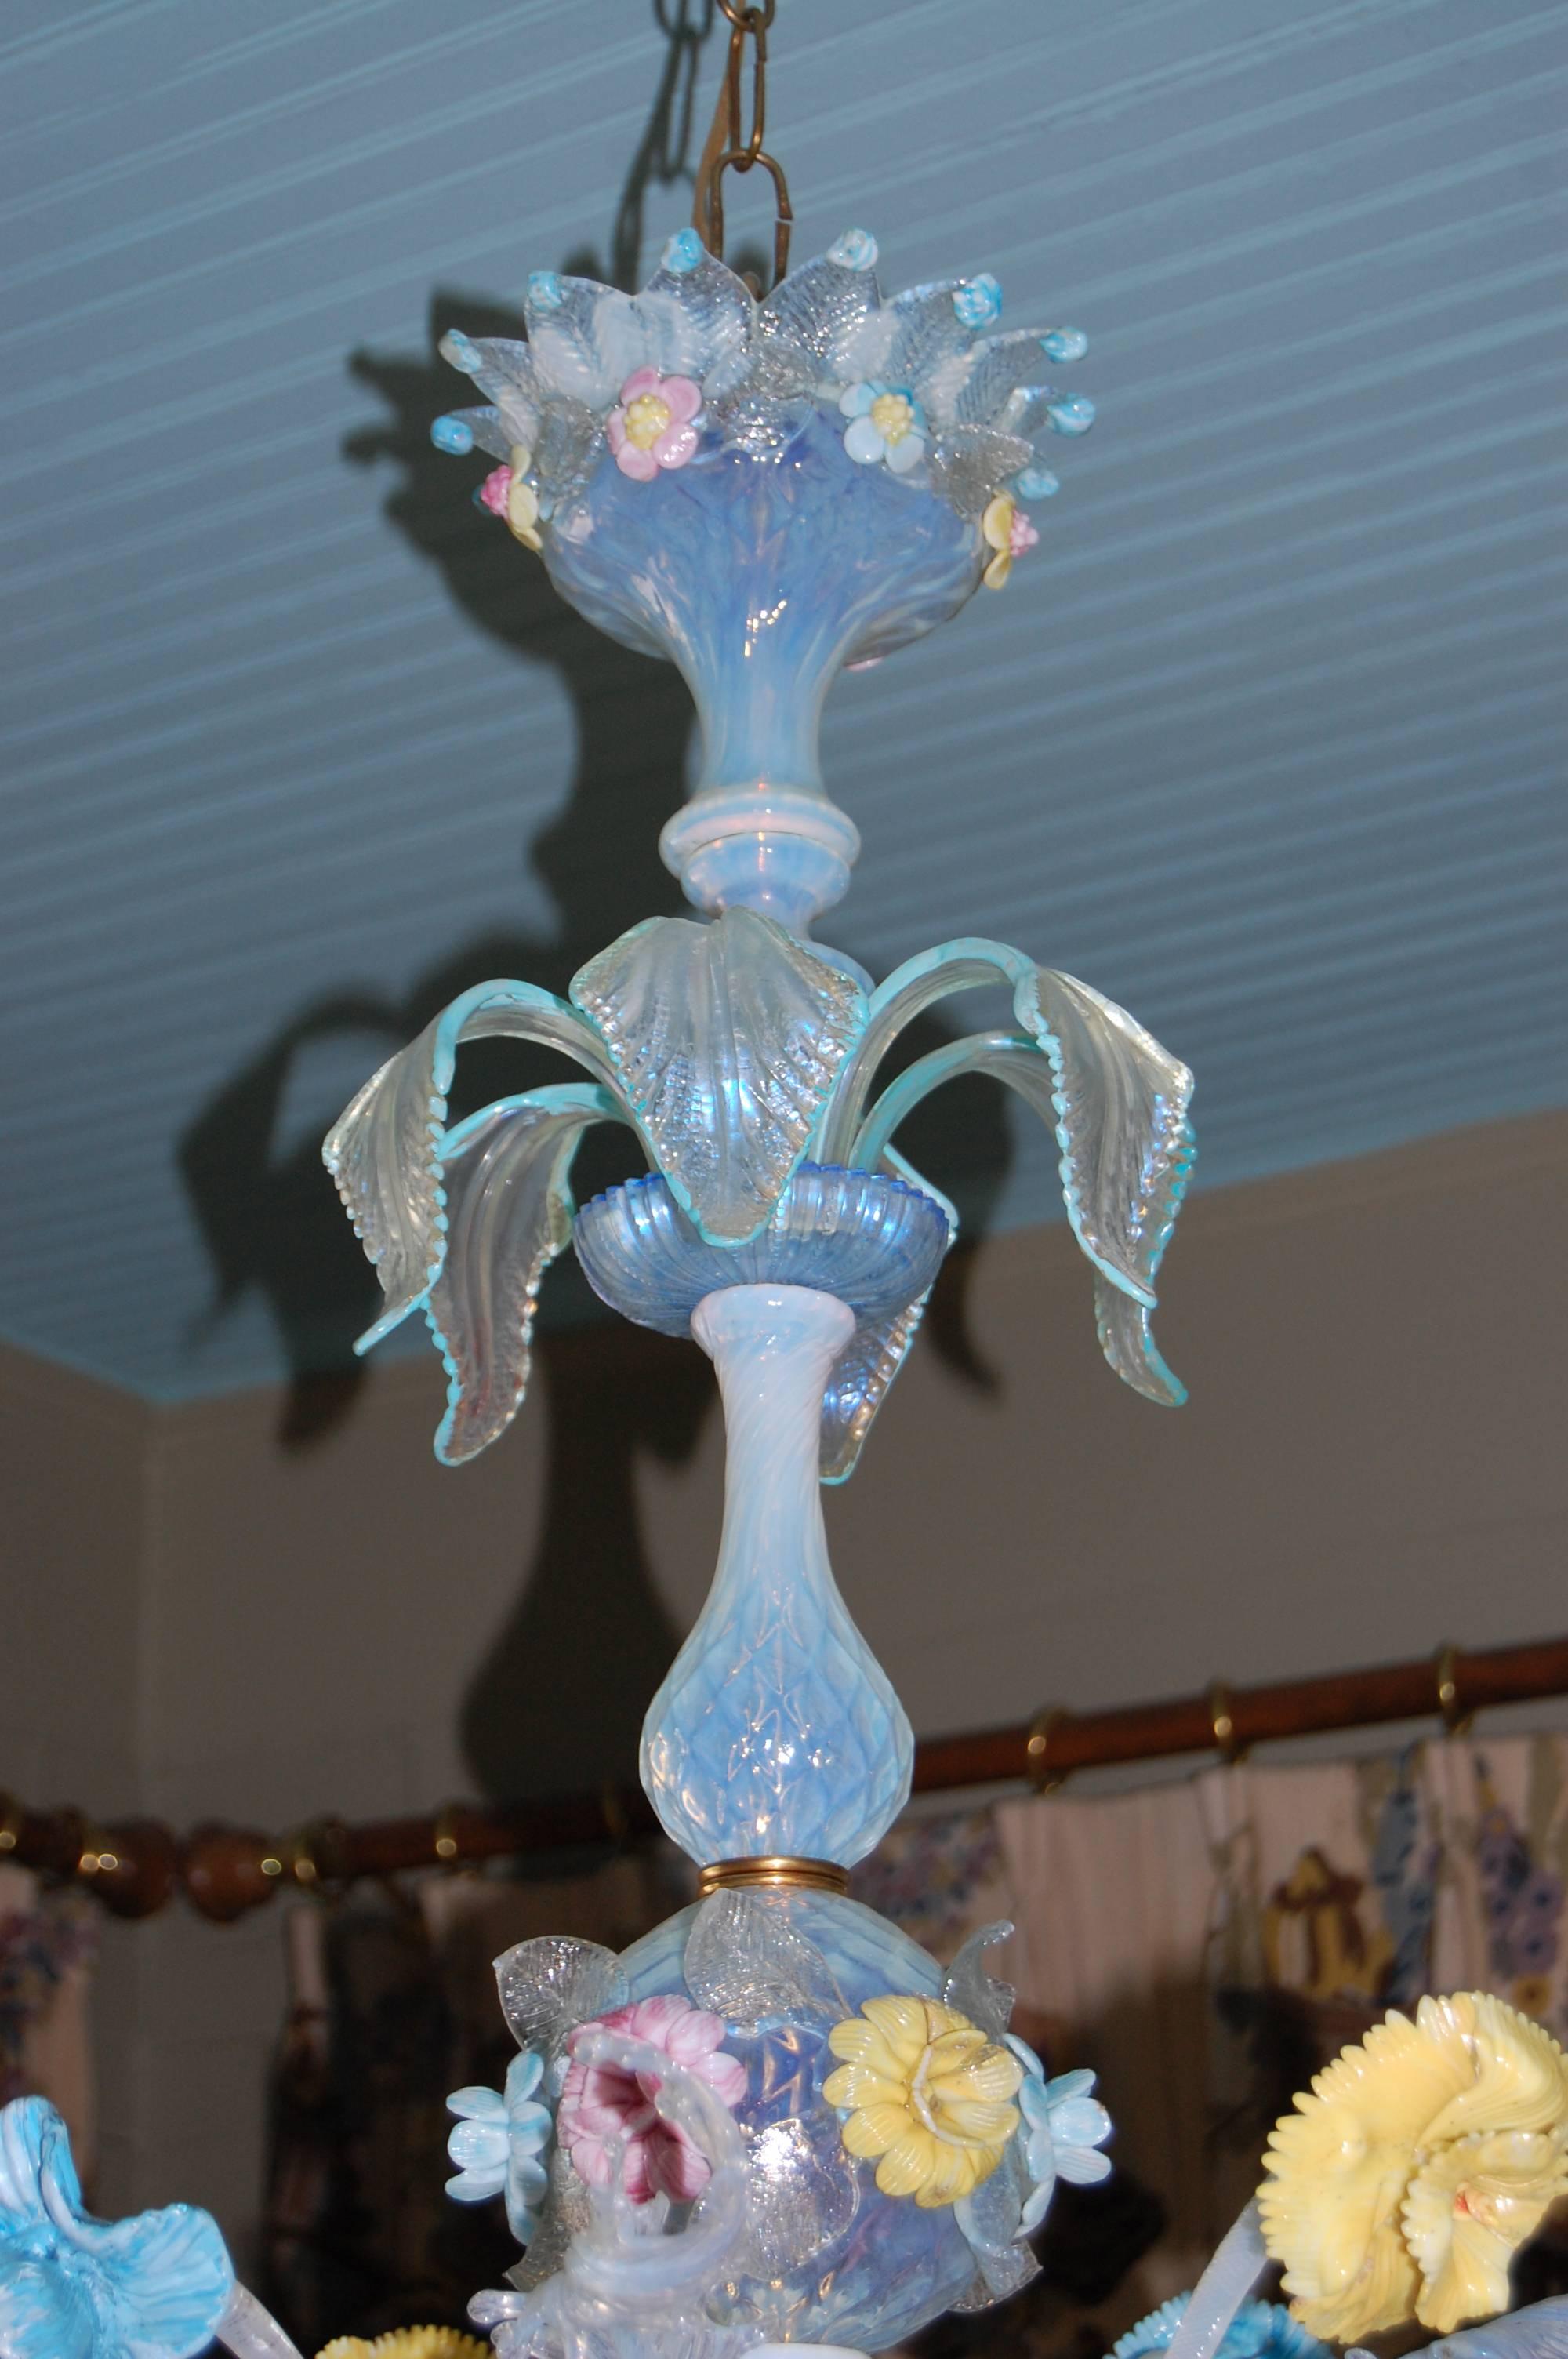 Early 20th Century Italian Venetian Six-Light Chandelier with Floral Sprays In Excellent Condition For Sale In Pittsburgh, PA